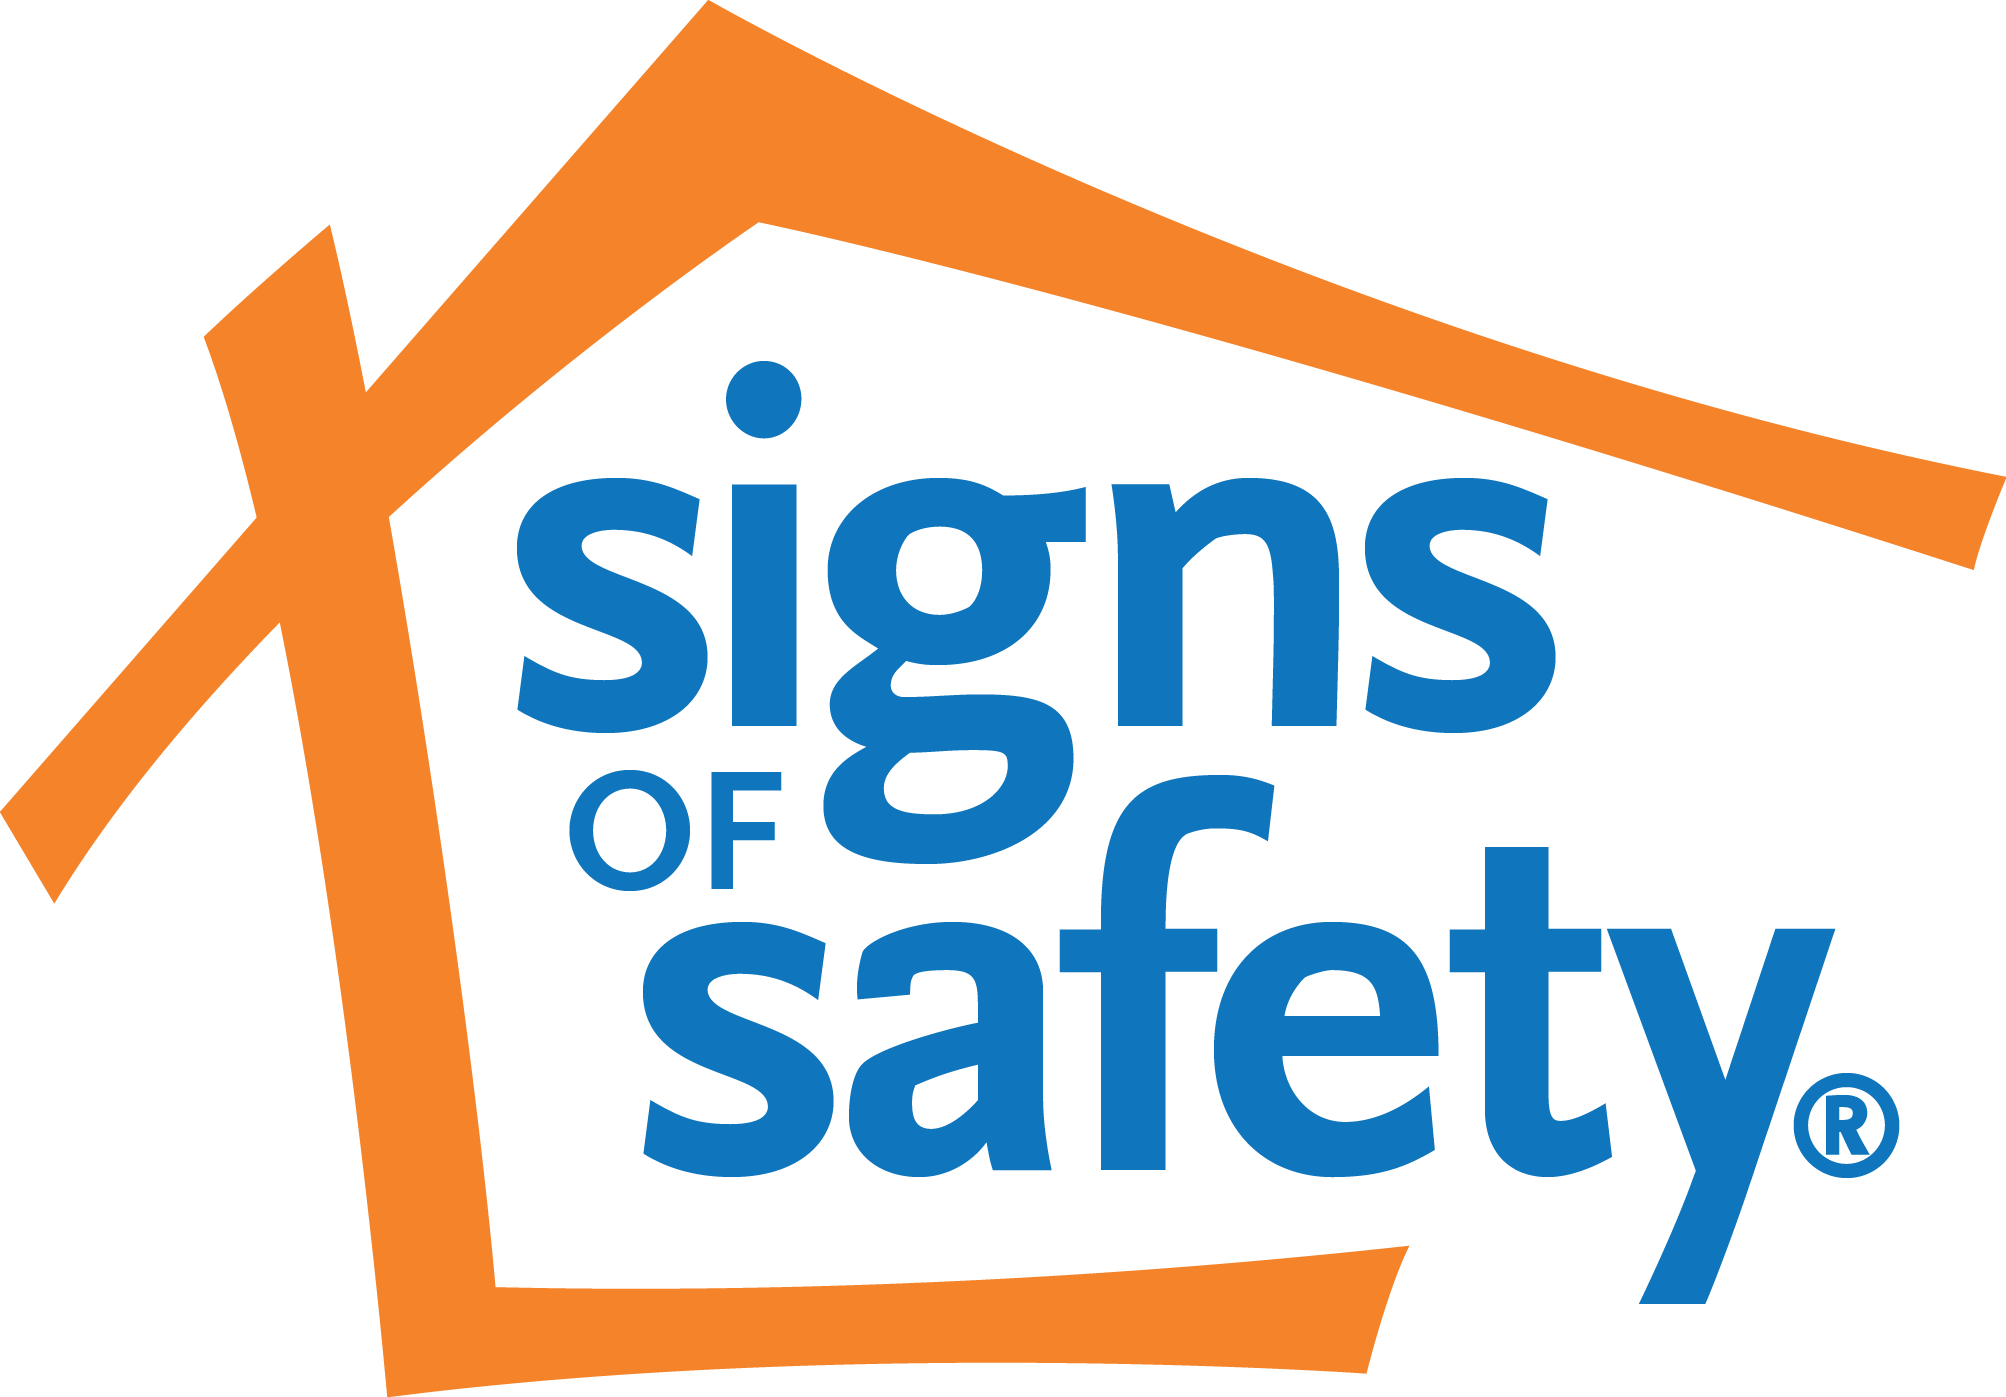 Signs of Safety - Signs of Safety